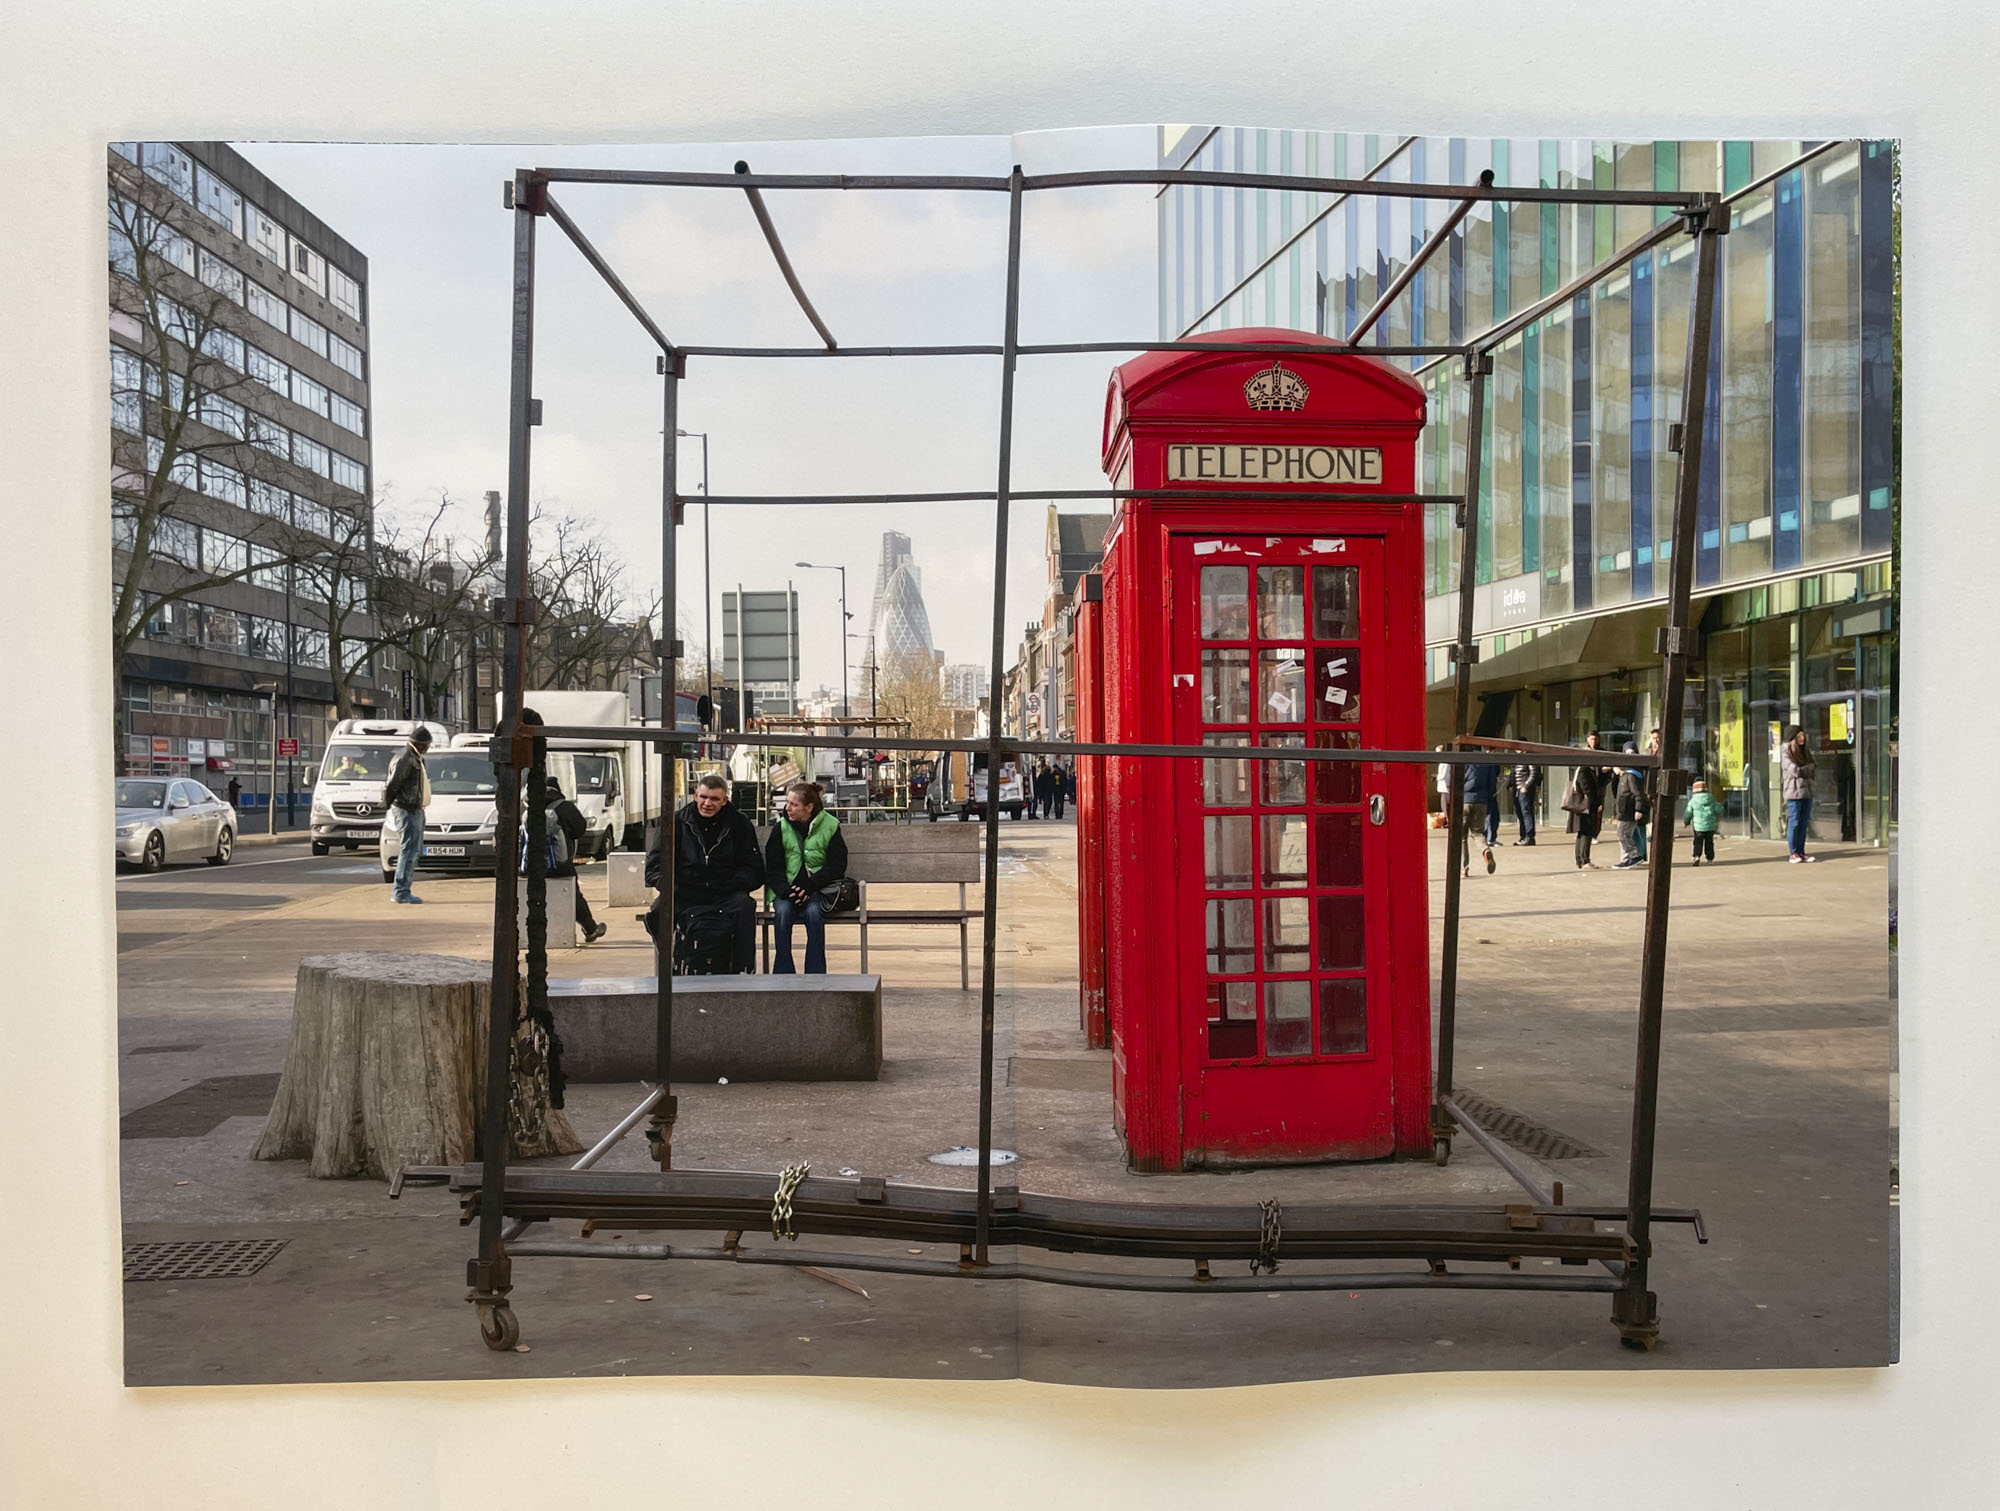 a view down Whitechapel High Street seen through the frame of a market stall, in the foreground is a red telephone box, in the middle distance an older couple sit on a bench, in the distance the Gherkin is visible